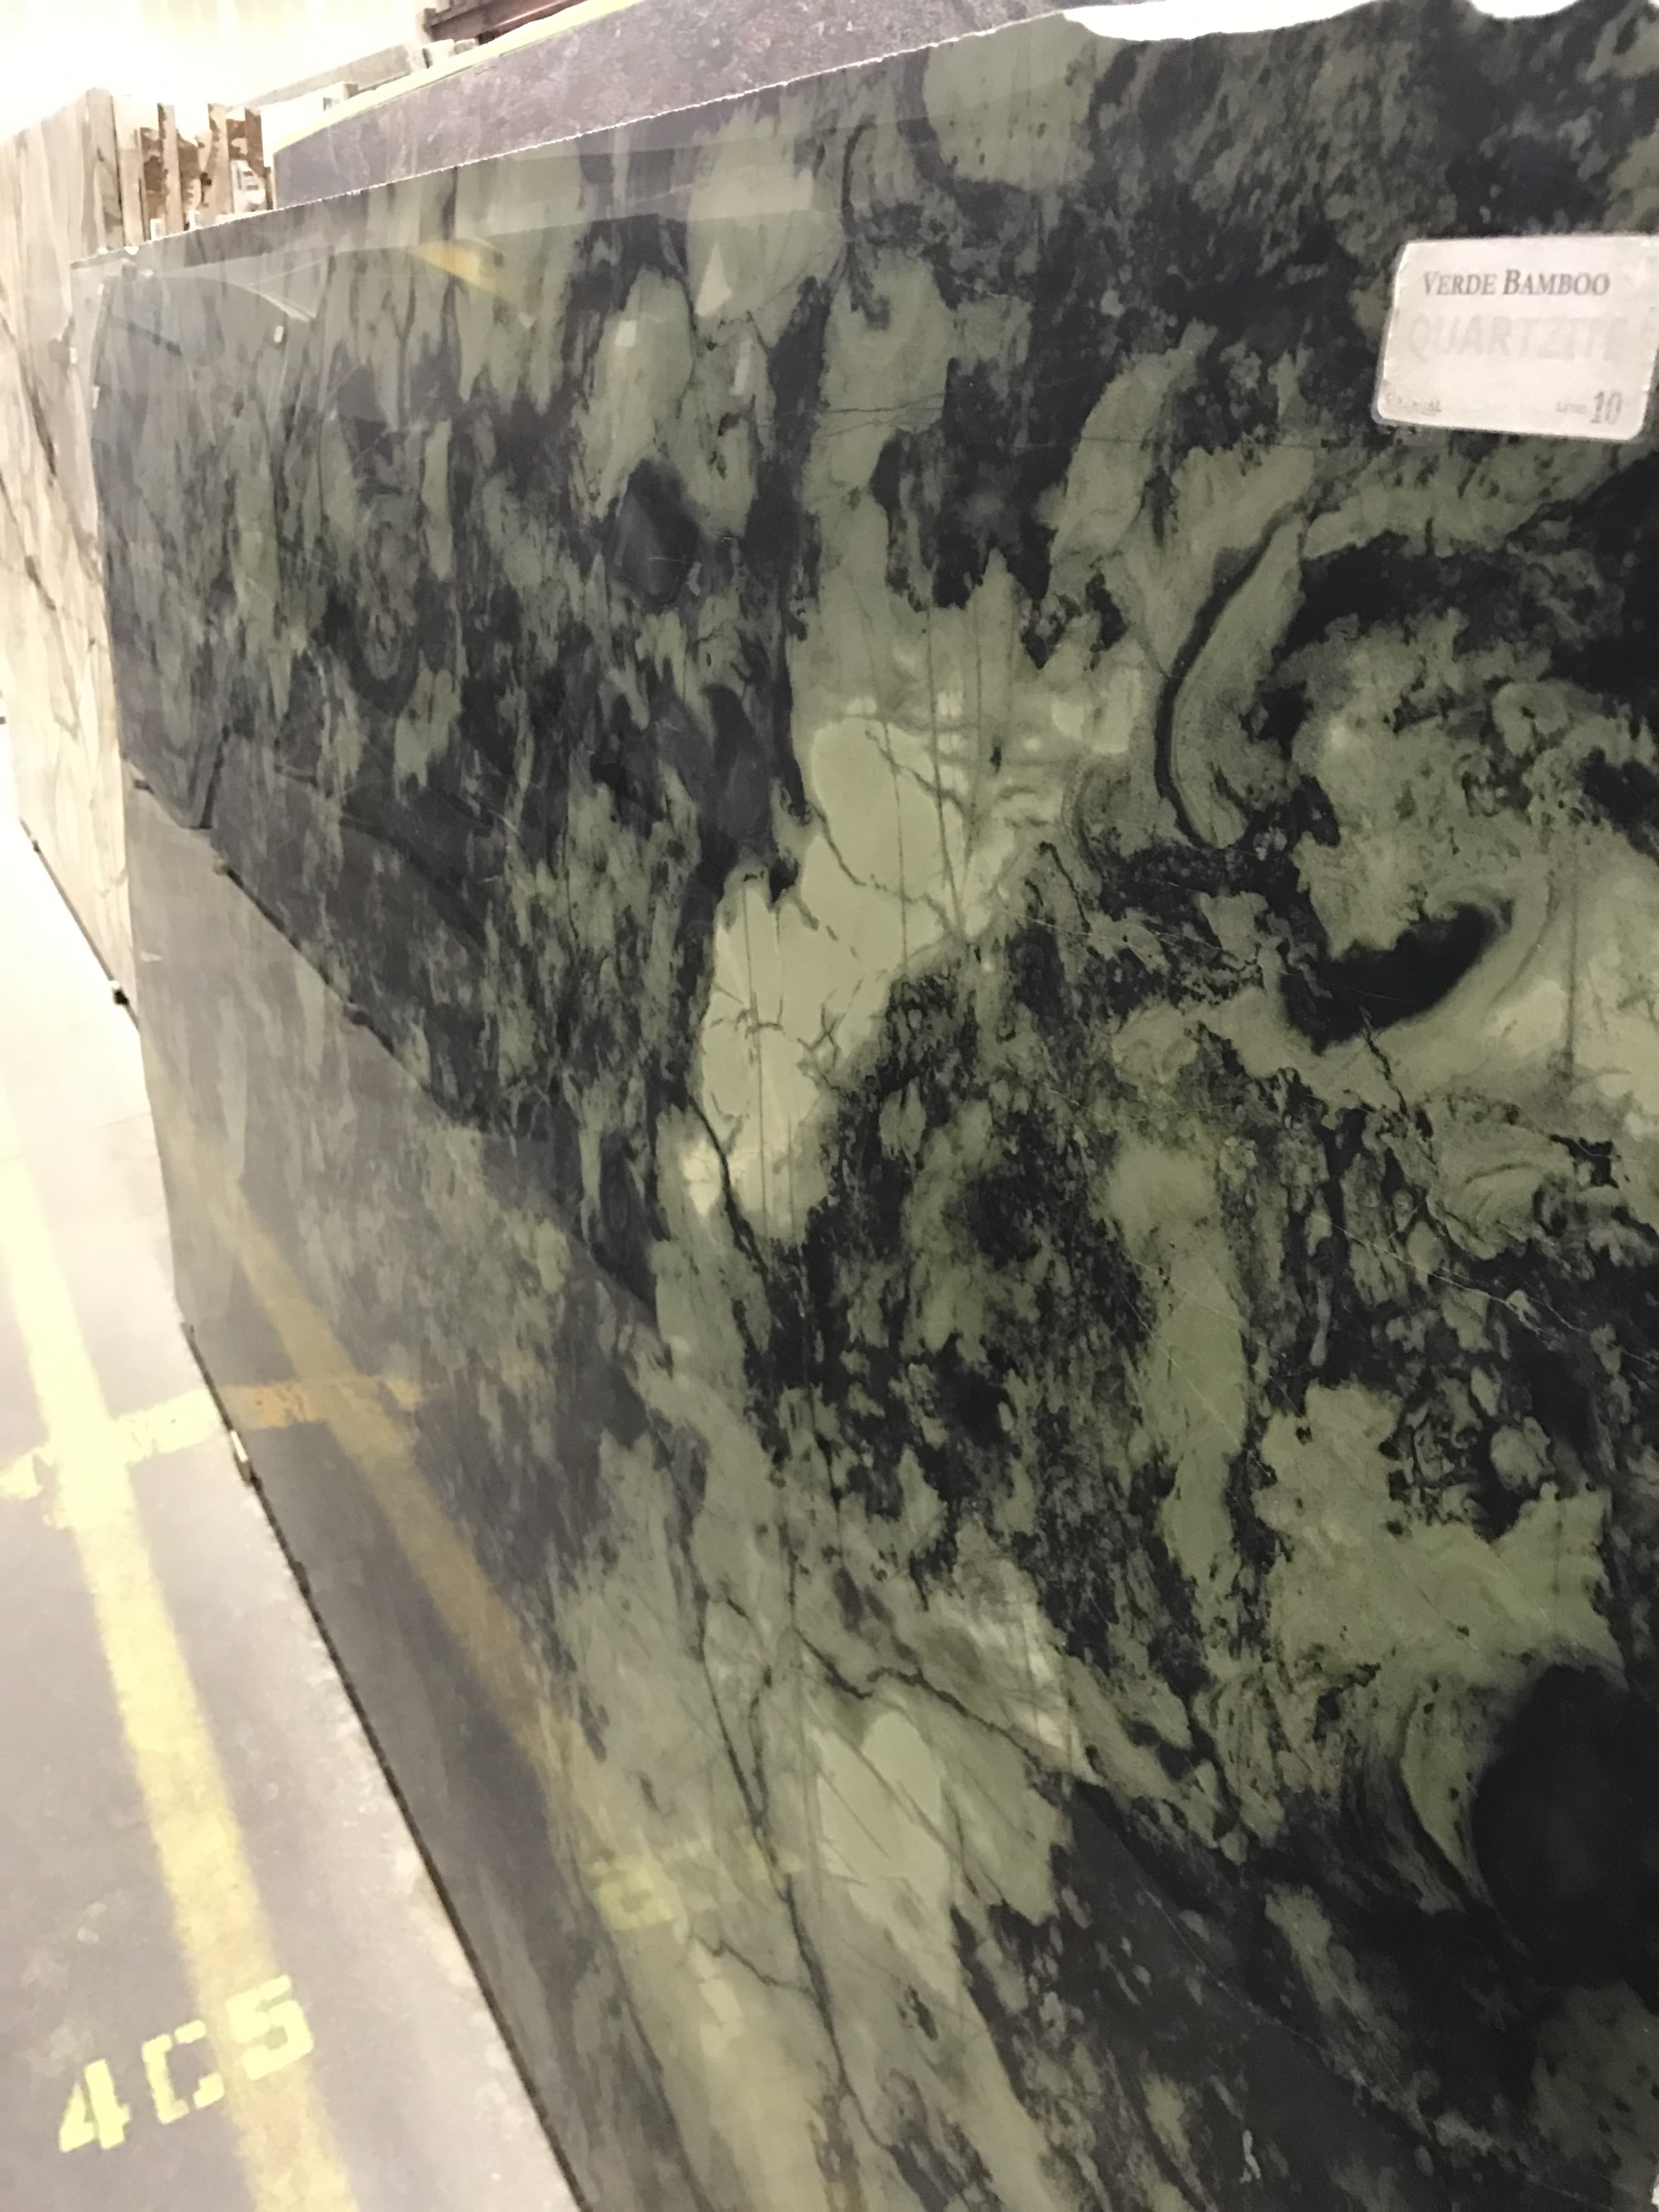 Verde Bamboo Quartzite Kitchen Countertop from United States 